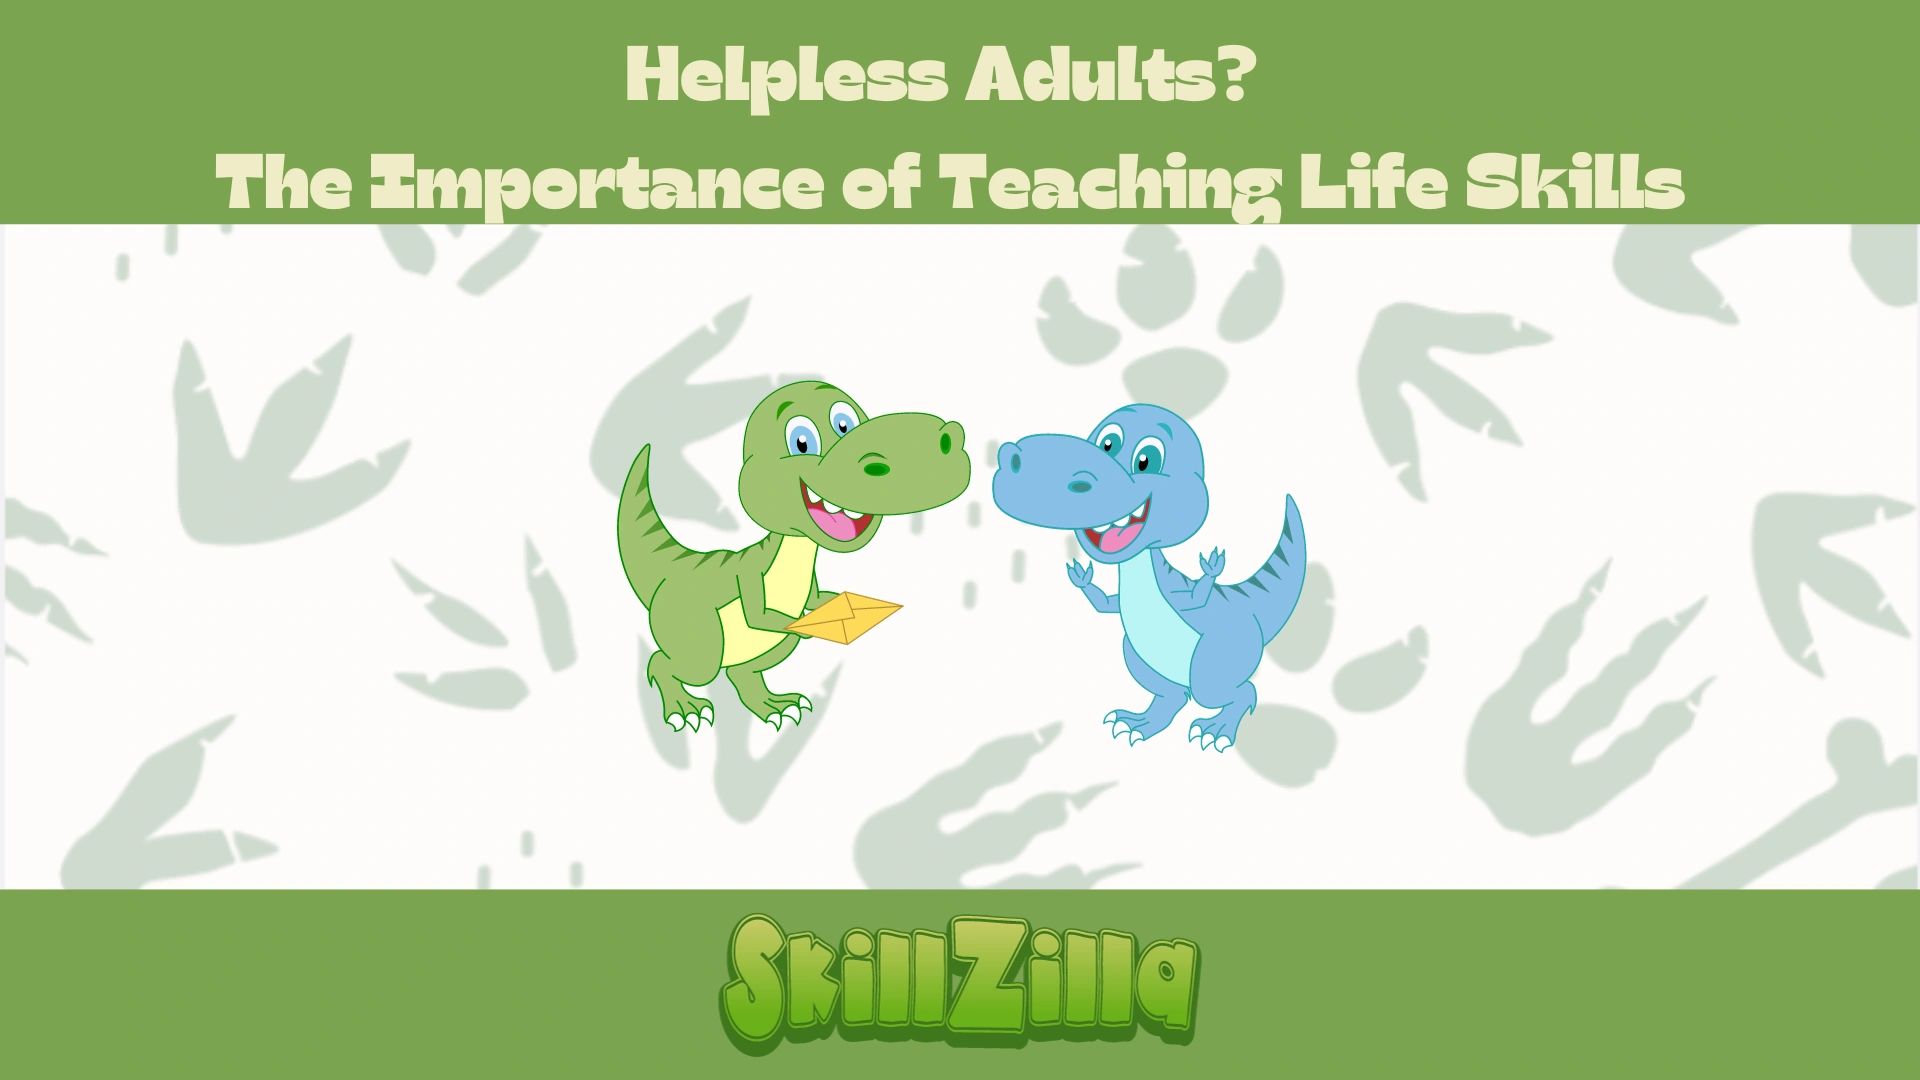 image of two cartoon t-rexes looking at each other with happy "faces", text reads Helpless Adults? The Importance of Teaching Lift Skills